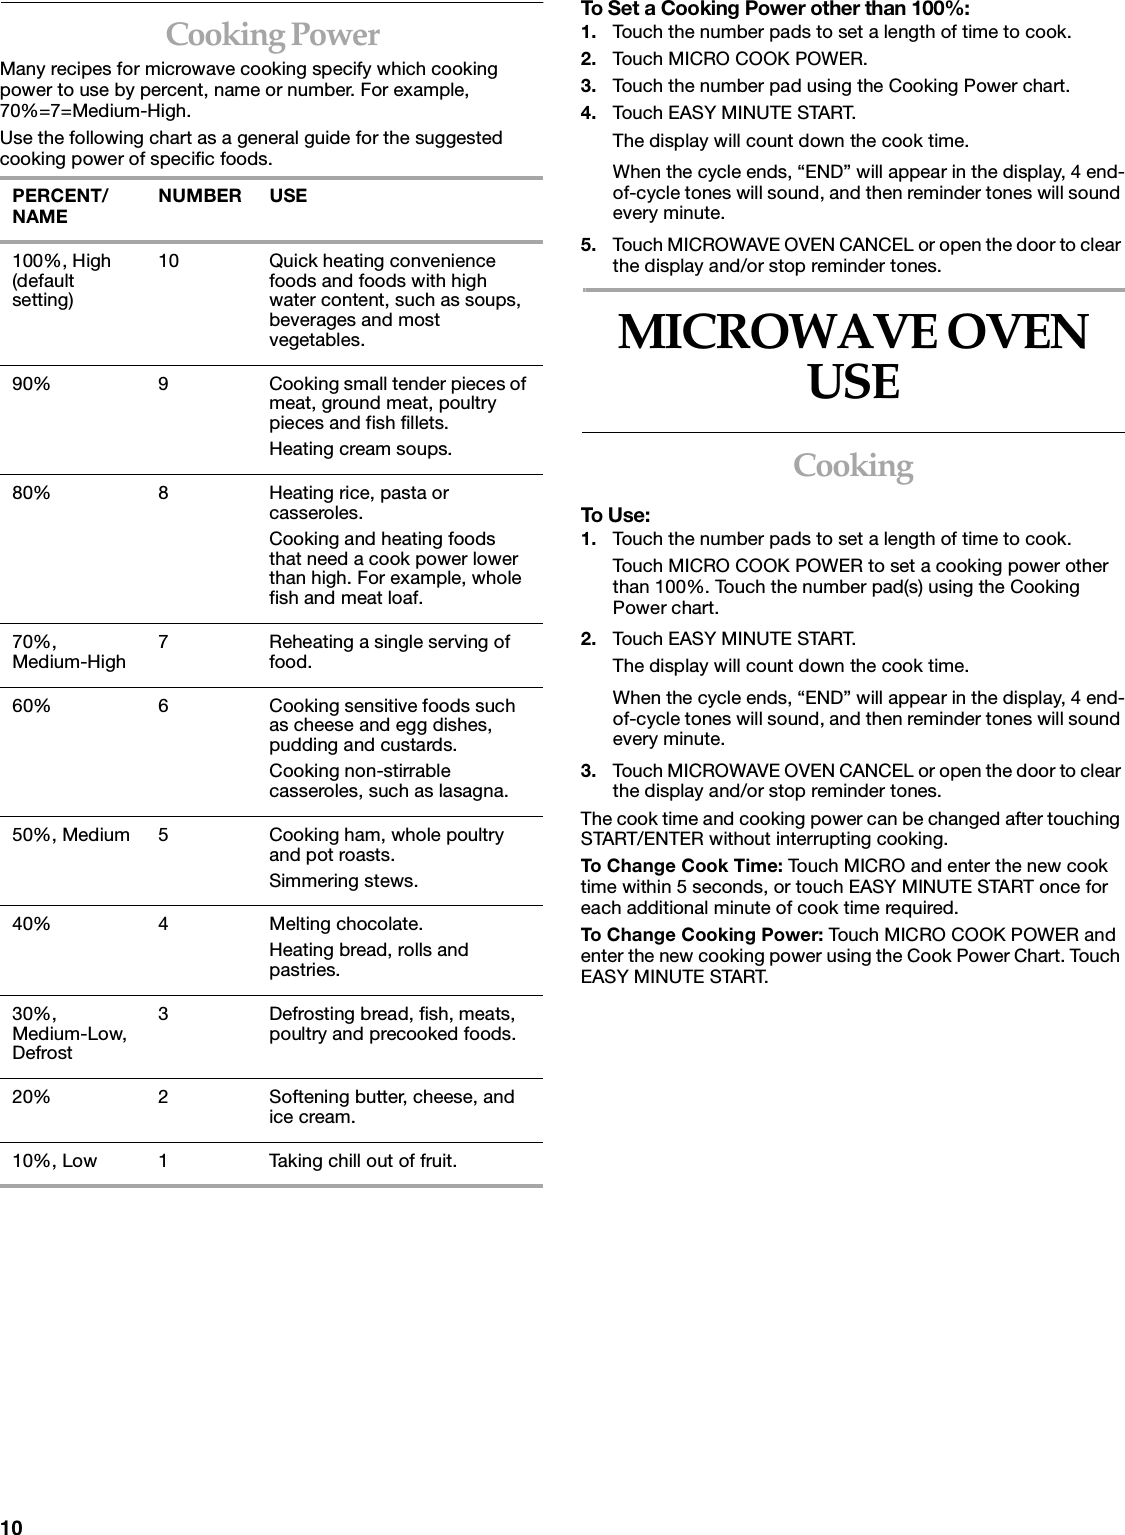 10Cooking PowerMany recipes for microwave cooking specify which cooking power to use by percent, name or number. For example, 70%=7=Medium-High.Use the following chart as a general guide for the suggested cooking power of specific foods. To Set a Cooking Power other than 100%:1. Touch the number pads to set a length of time to cook.2. Touch MICRO COOK POWER.3. Touch the number pad using the Cooking Power chart.4. Touch EASY MINUTE START.The display will count down the cook time.When the cycle ends, “END” will appear in the display, 4 end-of-cycle tones will sound, and then reminder tones will sound every minute.5. Touch MICROWAVE OVEN CANCEL or open the door to clear the display and/or stop reminder tones.MICROWAVE OVEN USECookingTo Use :1. Touch the number pads to set a length of time to cook.Touch MICRO COOK POWER to set a cooking power other than 100%. Touch the number pad(s) using the Cooking Power chart.2. Touch EASY MINUTE START.The display will count down the cook time.When the cycle ends, “END” will appear in the display, 4 end-of-cycle tones will sound, and then reminder tones will sound every minute.3. Touch MICROWAVE OVEN CANCEL or open the door to clear the display and/or stop reminder tones.The cook time and cooking power can be changed after touching START/ENTER without interrupting cooking.To Change Cook Time: Touch MICRO and enter the new cook time within 5 seconds, or touch EASY MINUTE START once for each additional minute of cook time required.To Change Cooking Power: Touch MICRO COOK POWER and enter the new cooking power using the Cook Power Chart. Touch EASY MINUTE START.PERCENT/NAMENUMBER USE100%, High (default setting)10 Quick heating convenience foods and foods with high water content, such as soups, beverages and most vegetables.90% 9 Cooking small tender pieces of meat, ground meat, poultry pieces and fish fillets.Heating cream soups.80% 8 Heating rice, pasta or casseroles.Cooking and heating foods that need a cook power lower than high. For example, whole fish and meat loaf.70%,Medium-High7 Reheating a single serving of food.60% 6 Cooking sensitive foods such as cheese and egg dishes, pudding and custards.Cooking non-stirrable casseroles, such as lasagna.50%, Medium 5 Cooking ham, whole poultry and pot roasts.Simmering stews.40% 4 Melting chocolate.Heating bread, rolls and pastries.30%, Medium-Low, Defrost3 Defrosting bread, fish, meats, poultry and precooked foods.20% 2 Softening butter, cheese, and ice cream.10%, Low 1 Taking chill out of fruit.